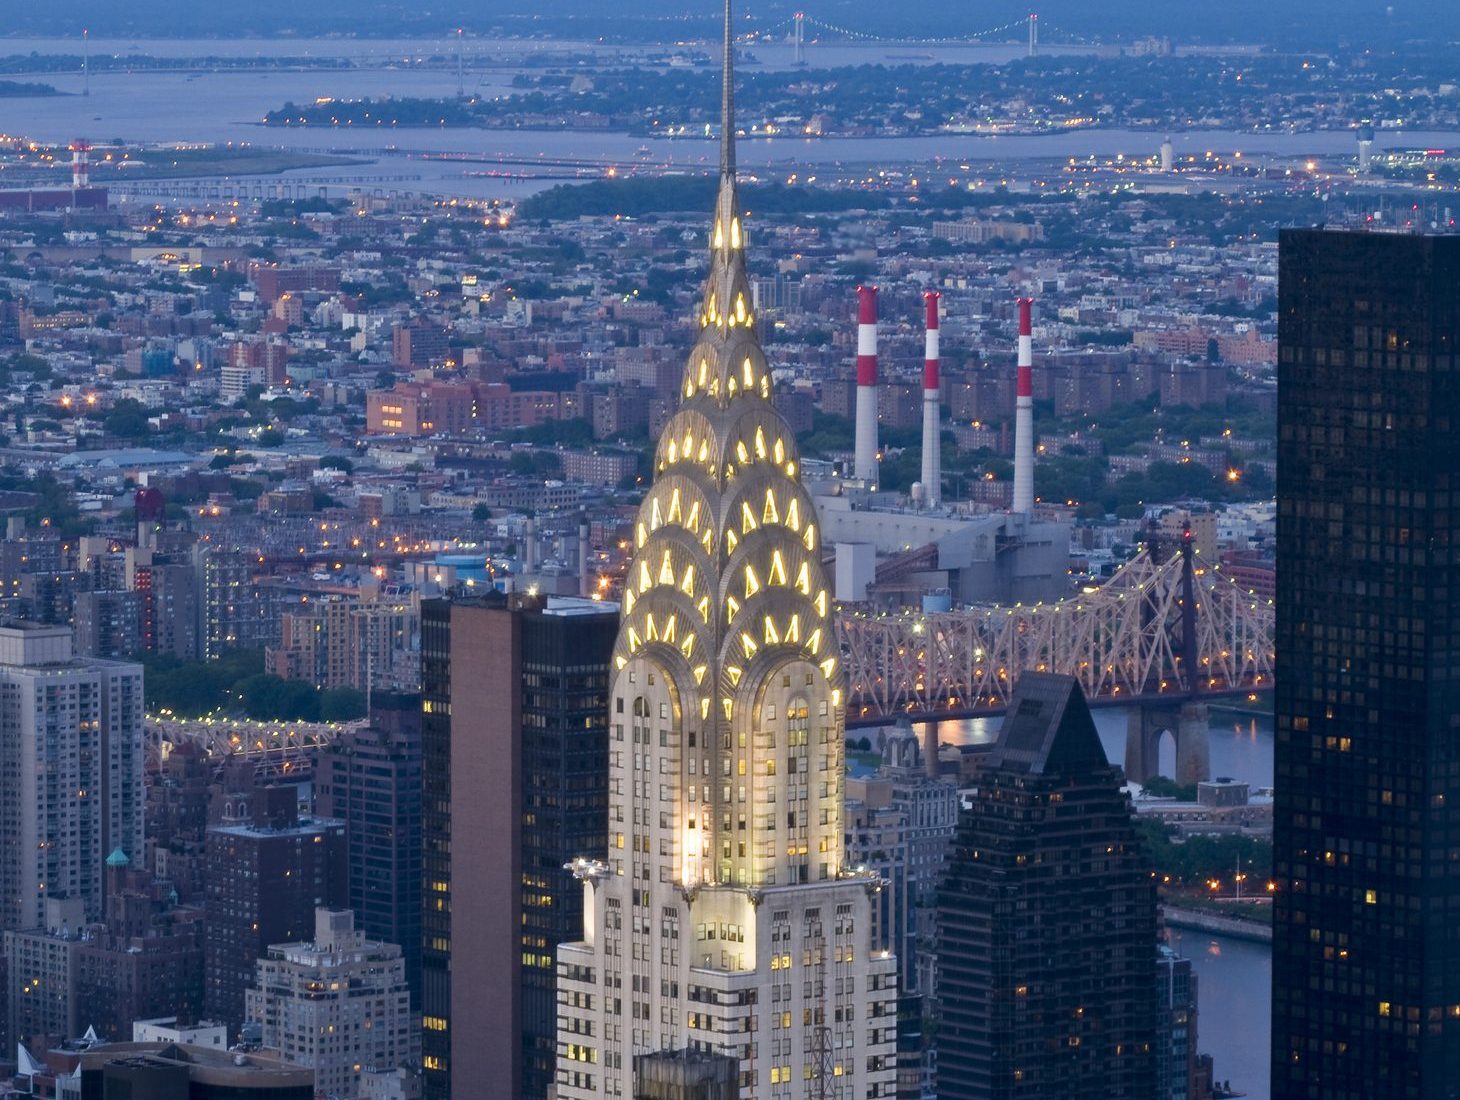 The Chrysler building in NYC